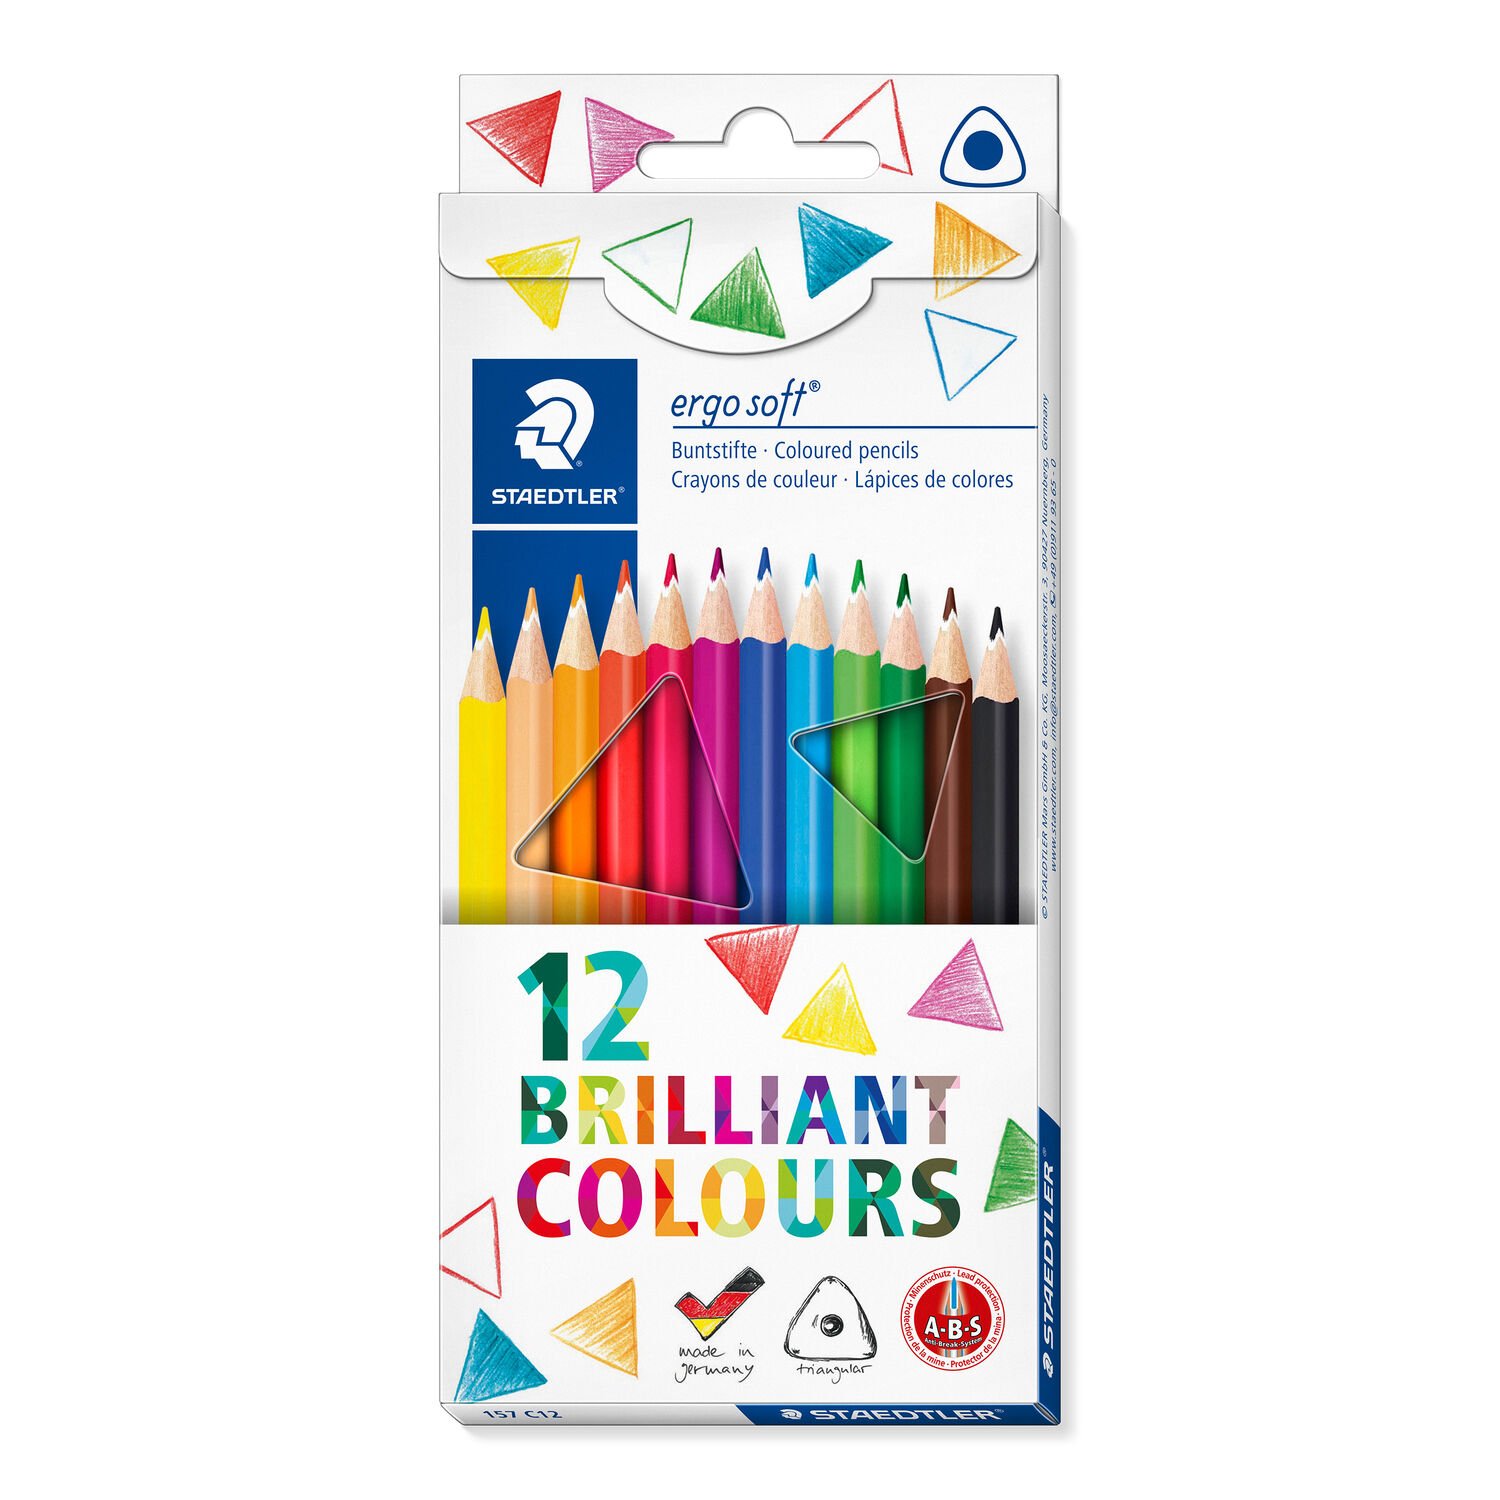 Staedtler Products-5